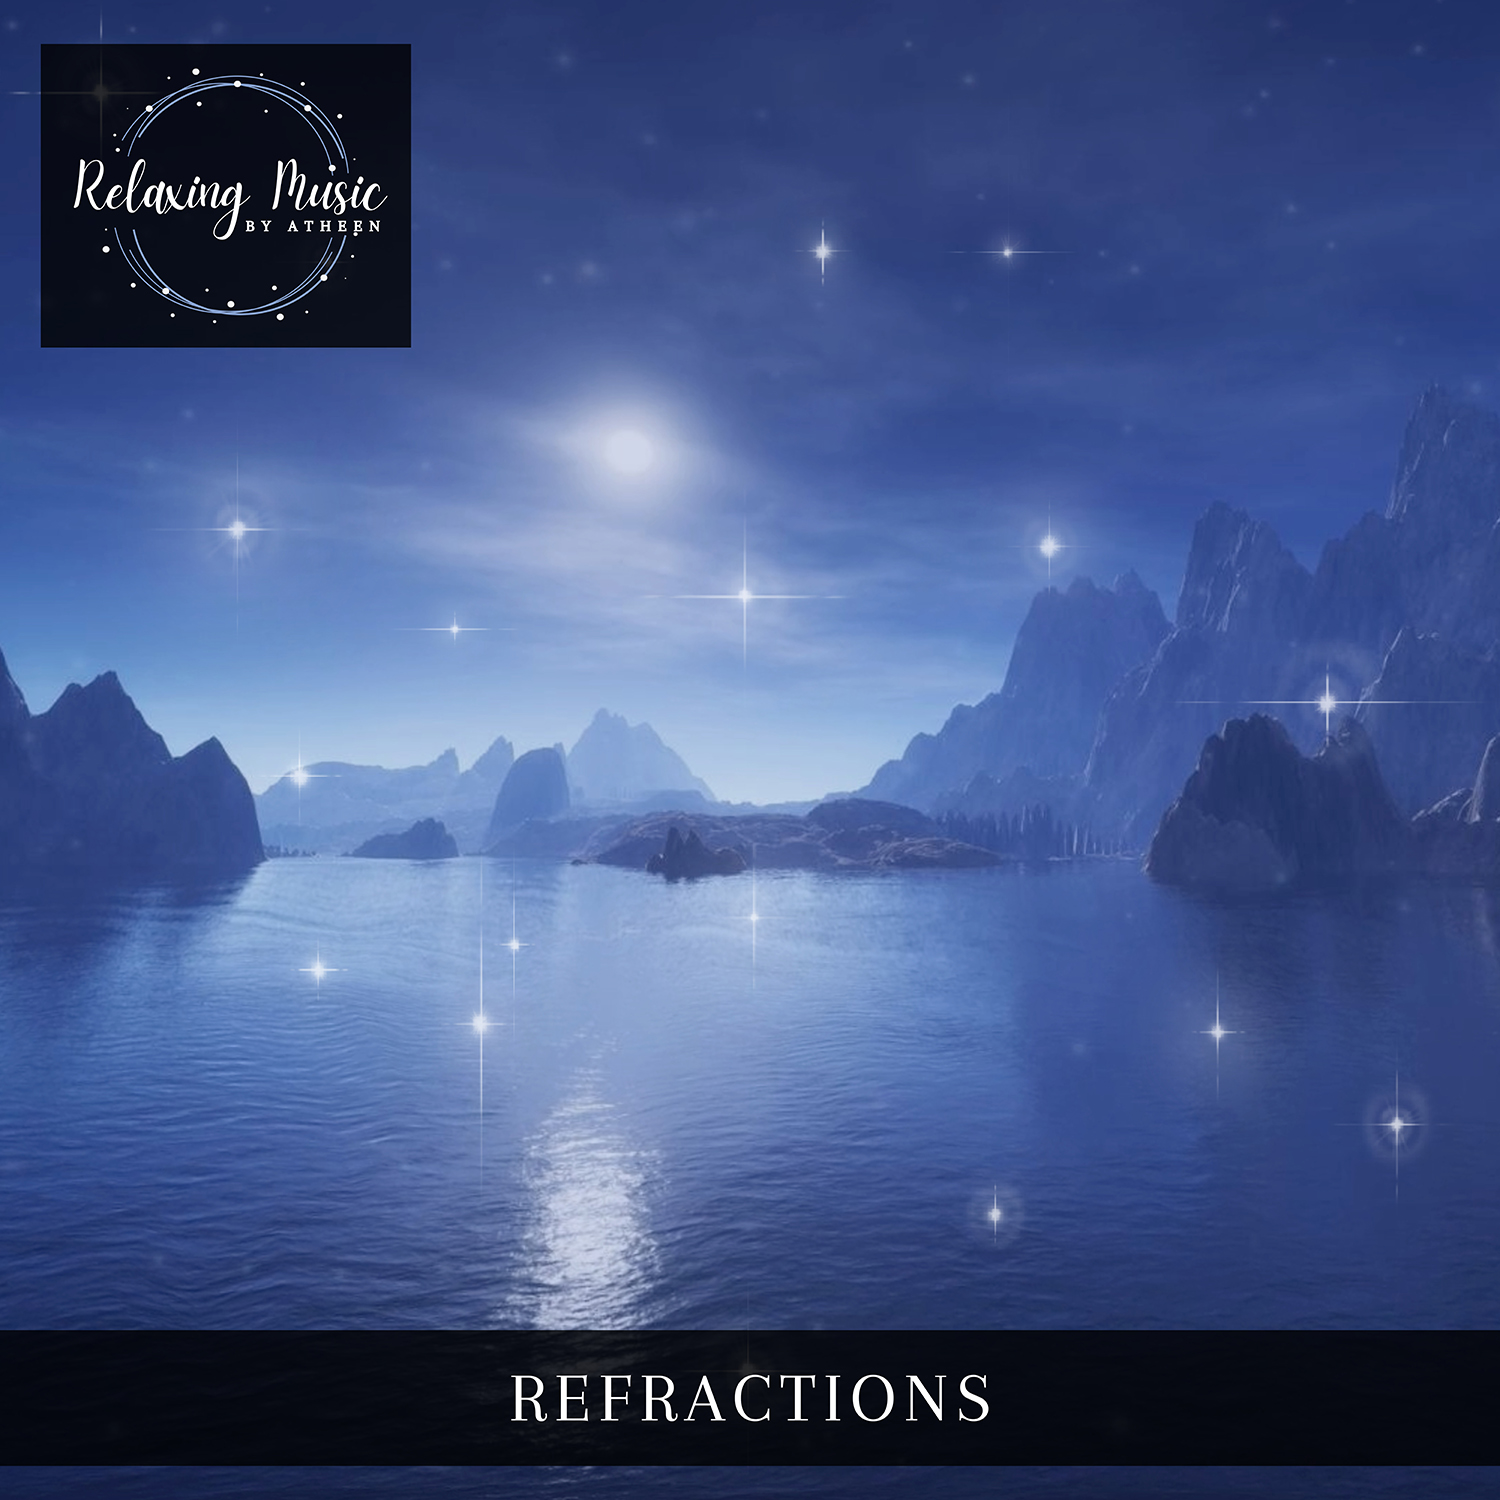 The Light Fantastic - Relaxing Music By Atheen - Refractions